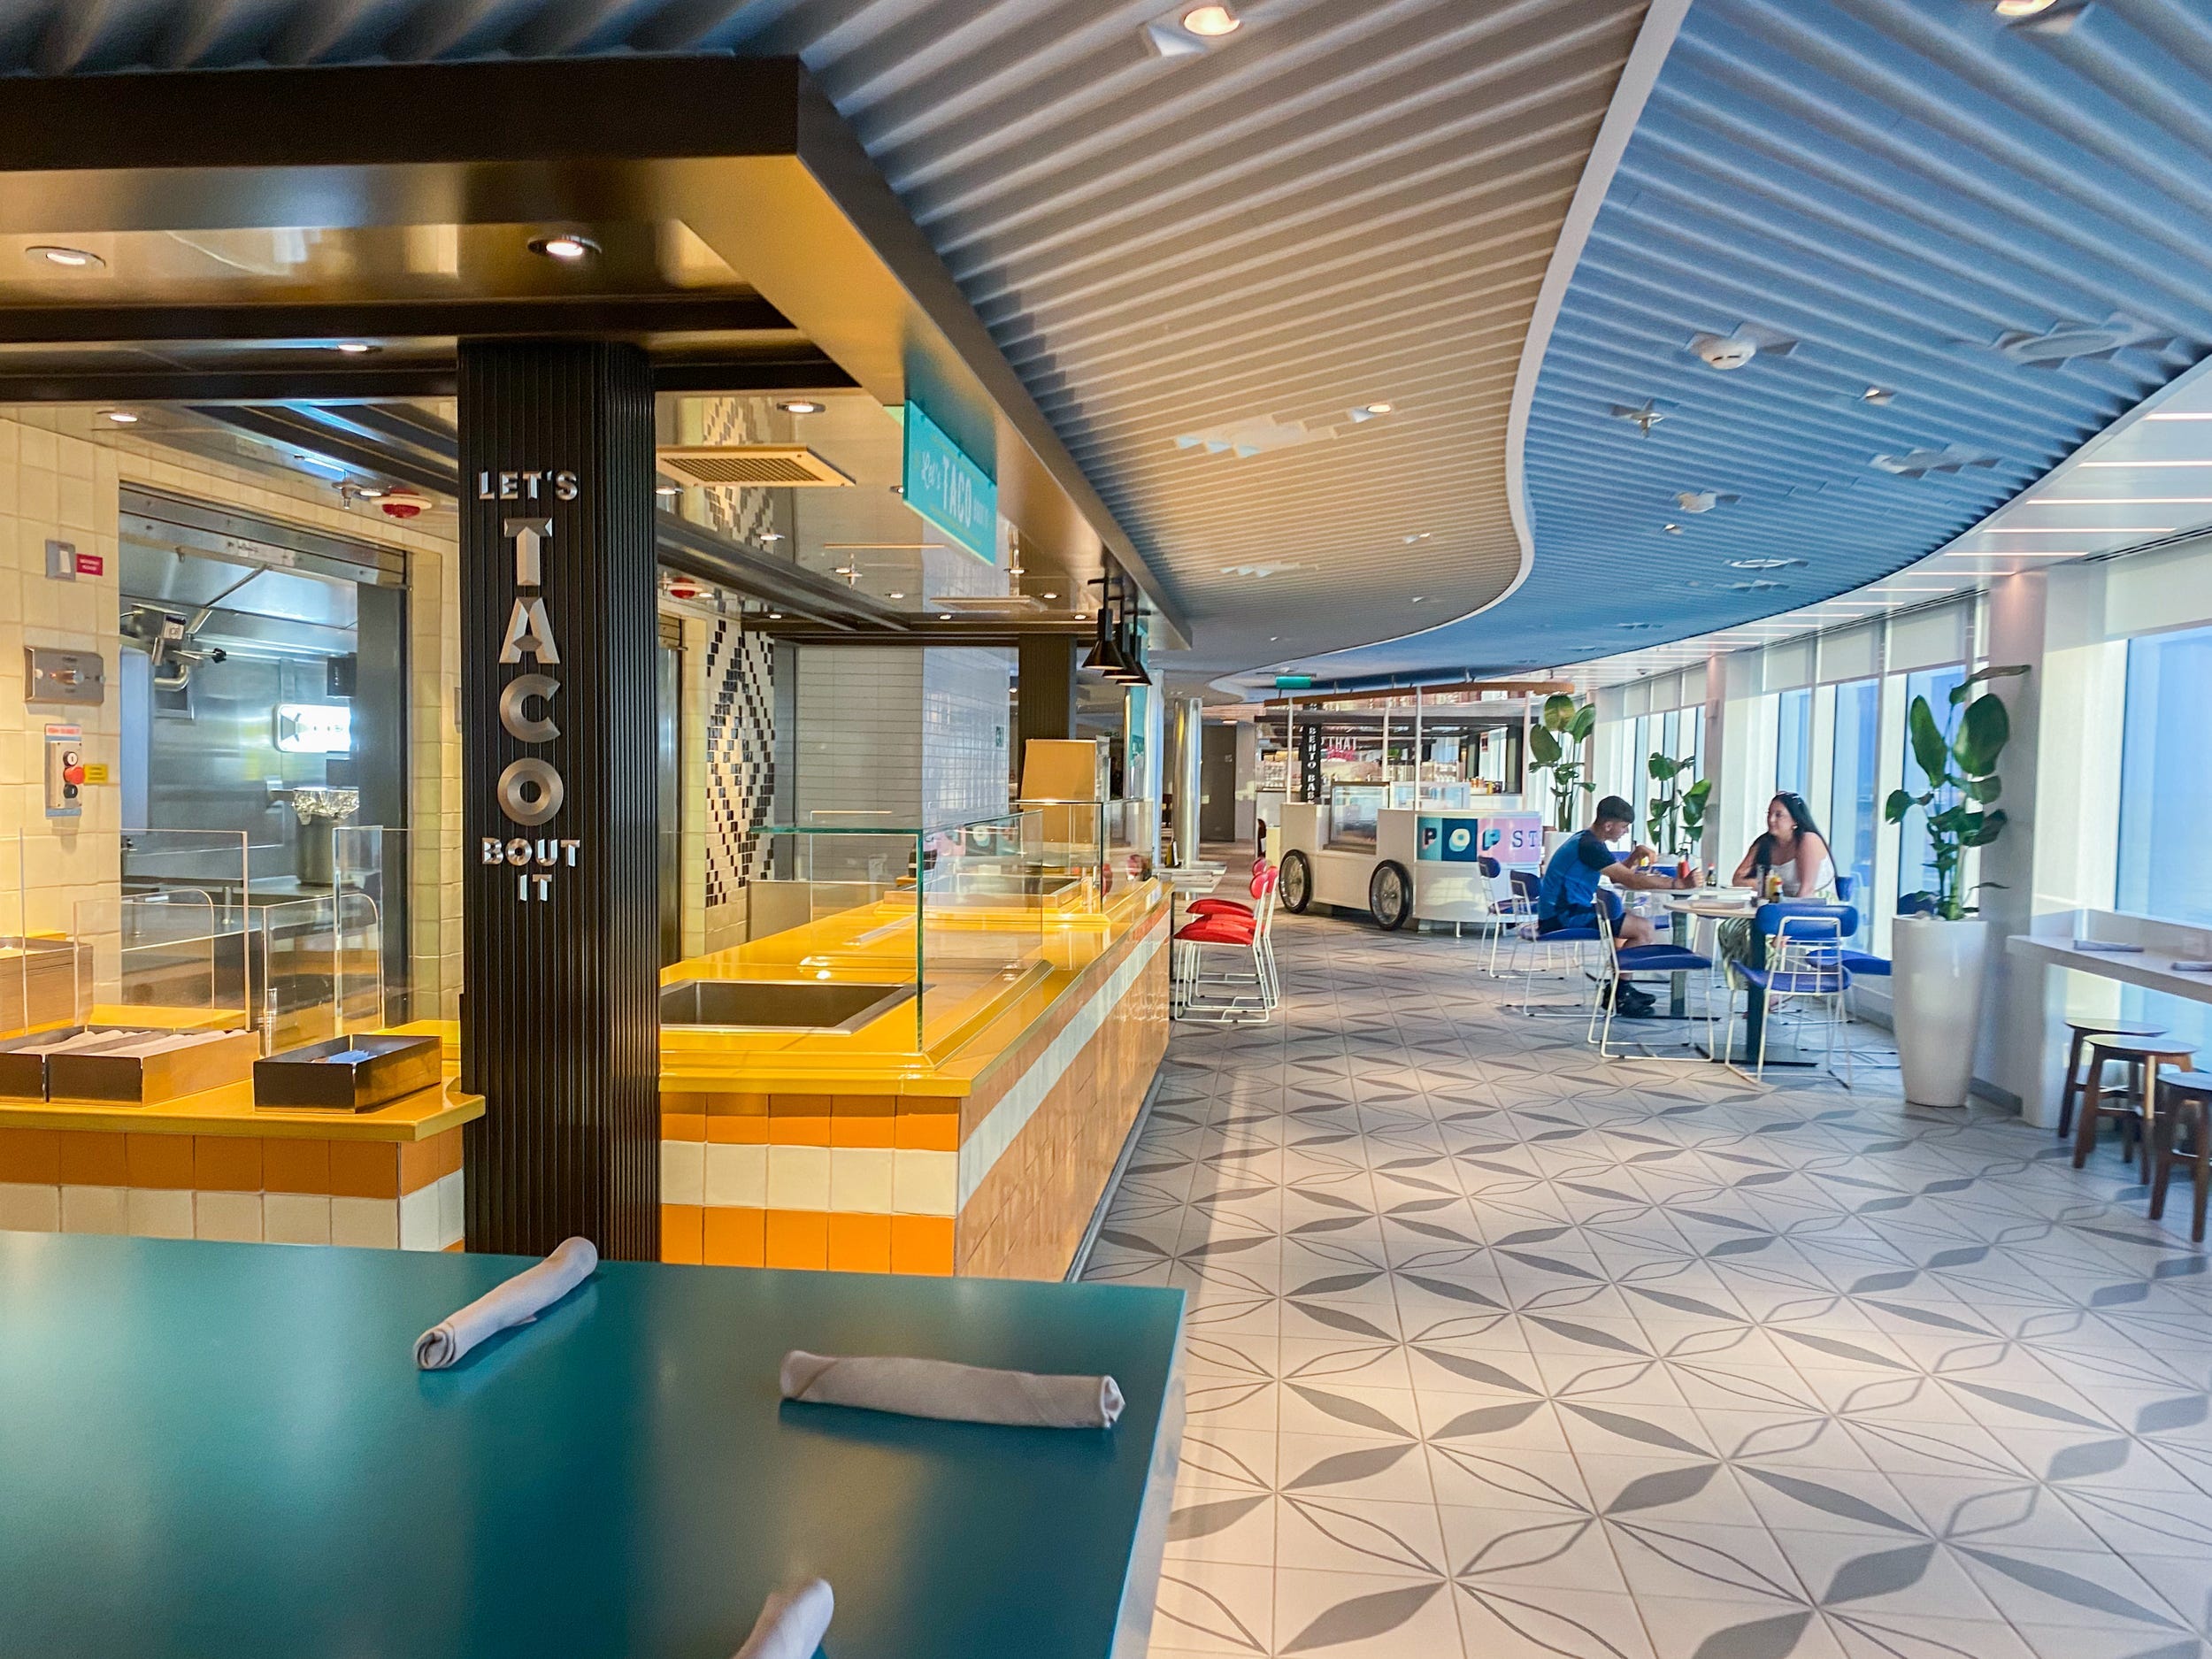 <p>The Galley is Virgin Voyages' food hall. Similar to a typical <a href="https://www.insider.com/royal-caribbean-wonder-of-the-seas-best-restaurants-2022-5">cruise ship buffet</a>, there are several stands with a wide range of offerings. But unlike most buffets, servers make the plates and hand them to the customers.</p><p>In the Galley, I had tacos, sushi, desserts, and breakfast foods. There's also a burger grill, a noodle bar, a panini shop, and a popsicle stand. </p><p>Additionally on deck 15, there's a standalone restaurant called Gunbae that serves family-style Korean barbecue dishes.  </p>